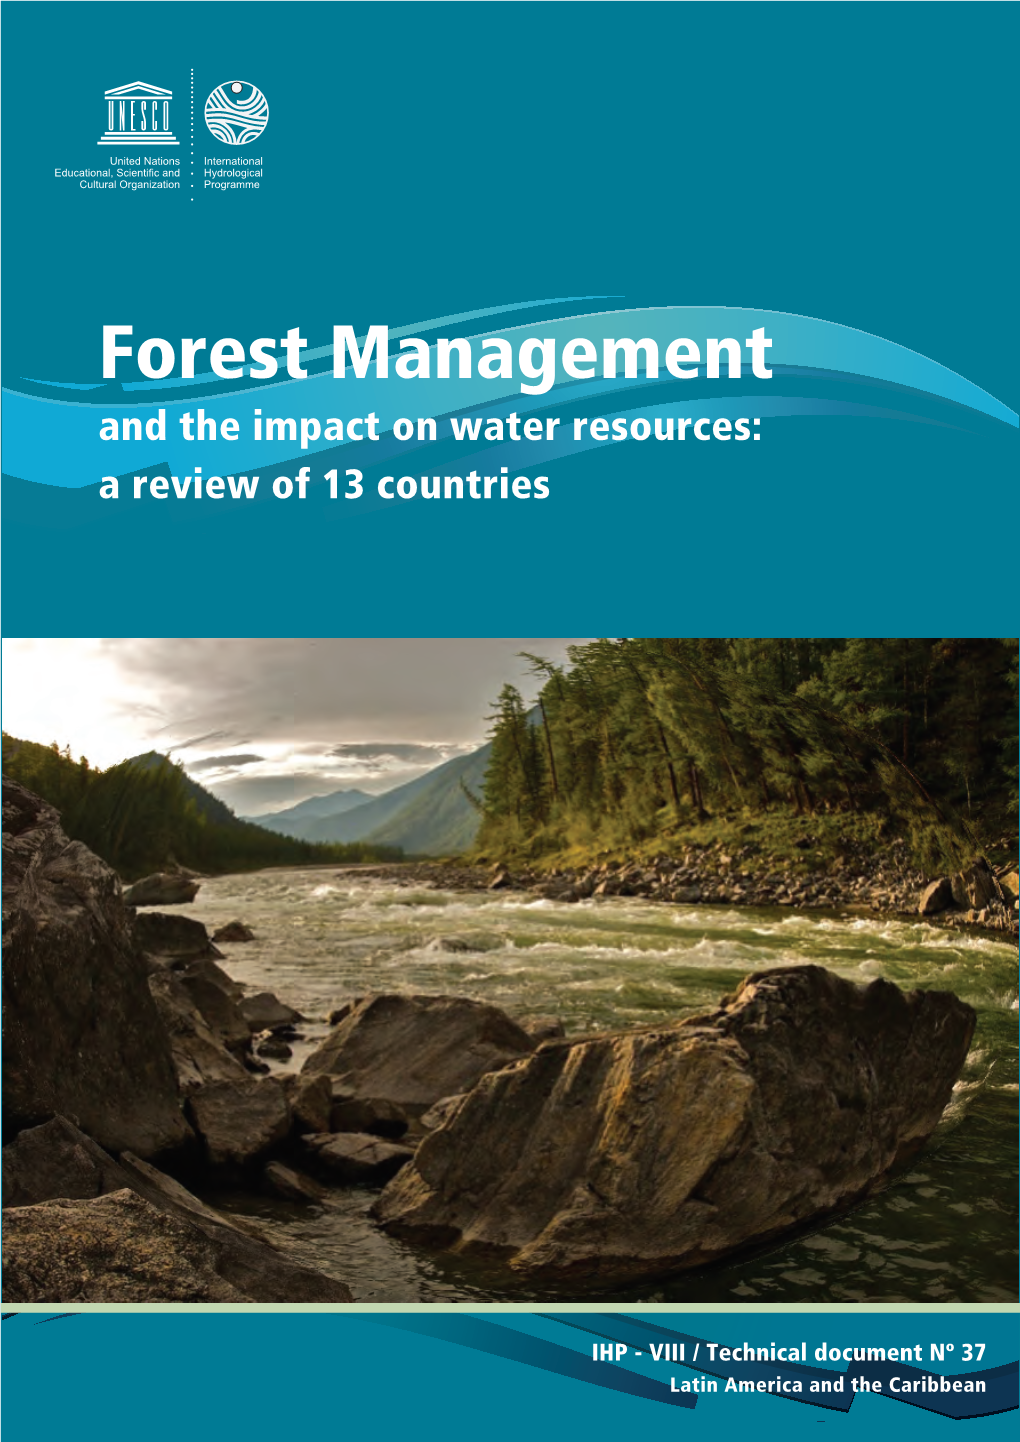 Forest Management and the Impact on Water Resources: a Review of 13 Countries